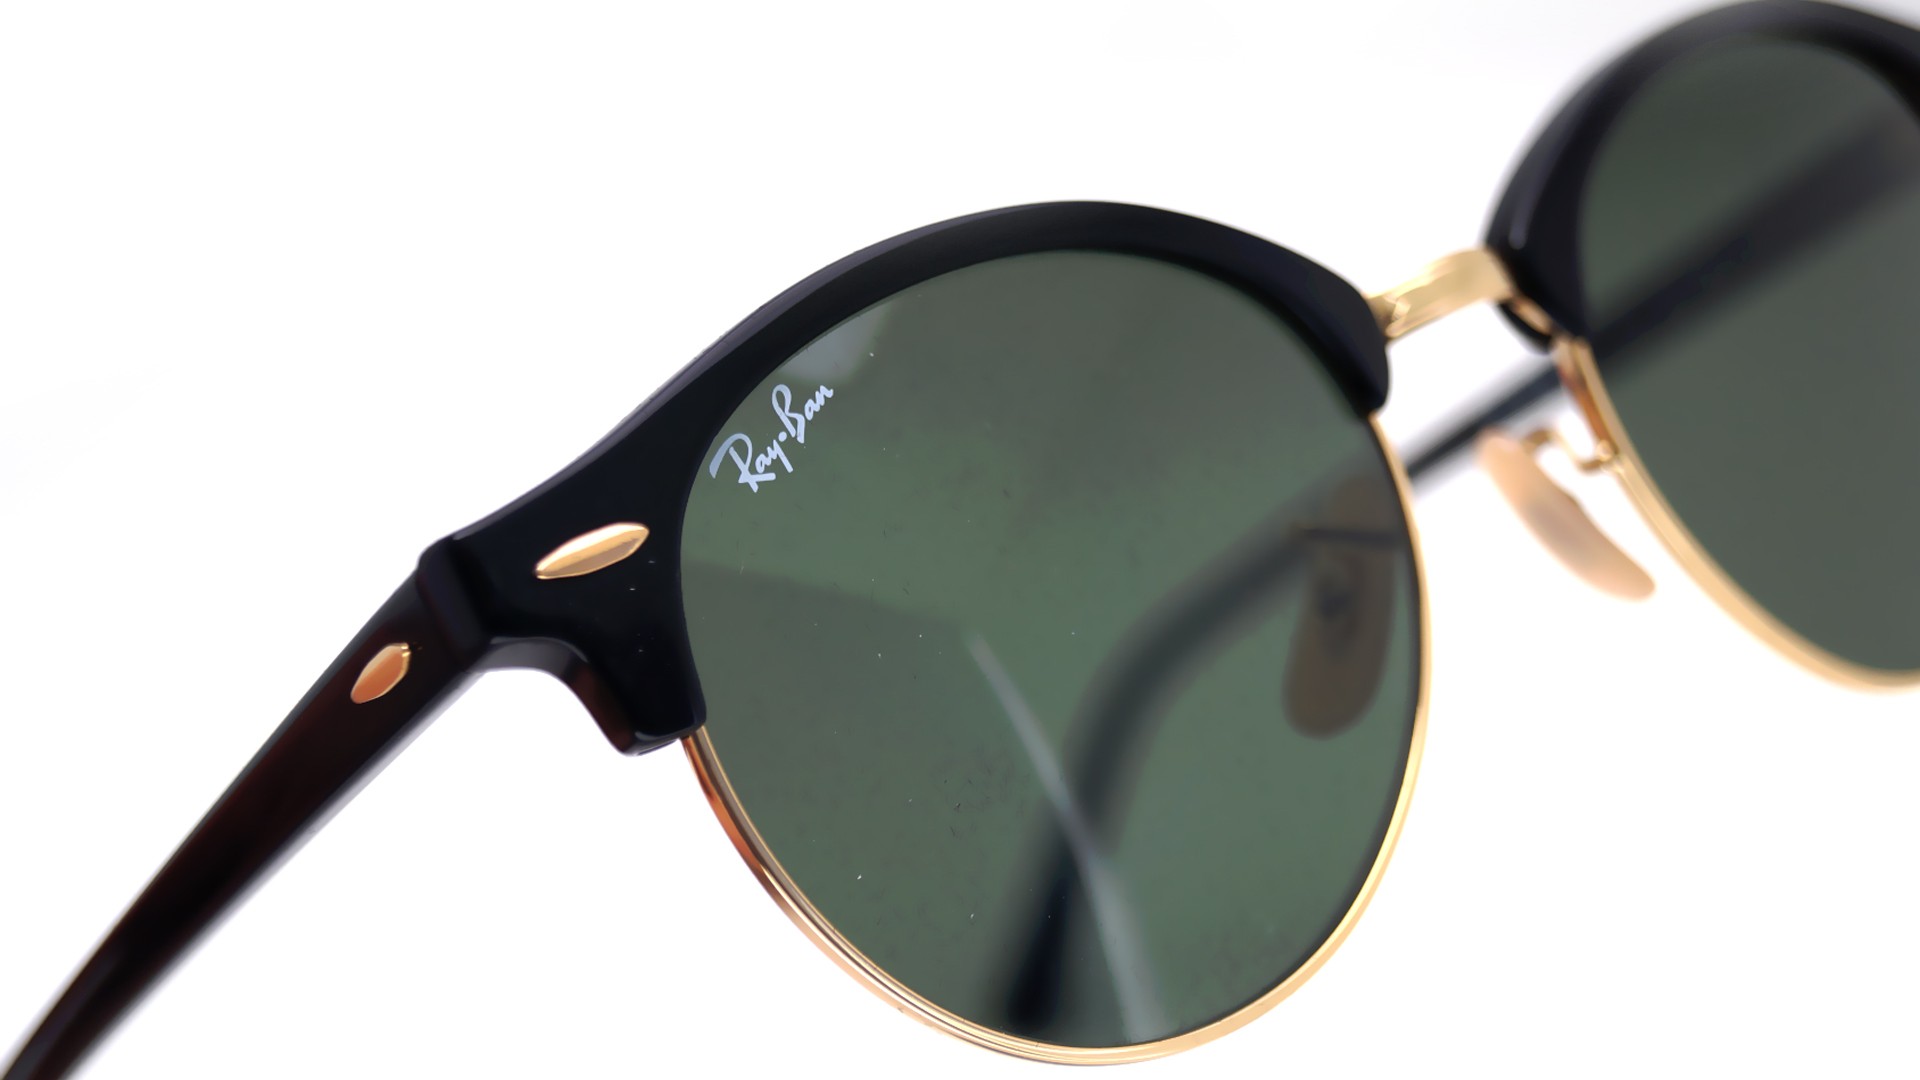 Ray-Ban Clubround Black G15 RB4246 901 51-19 Medium in stock.